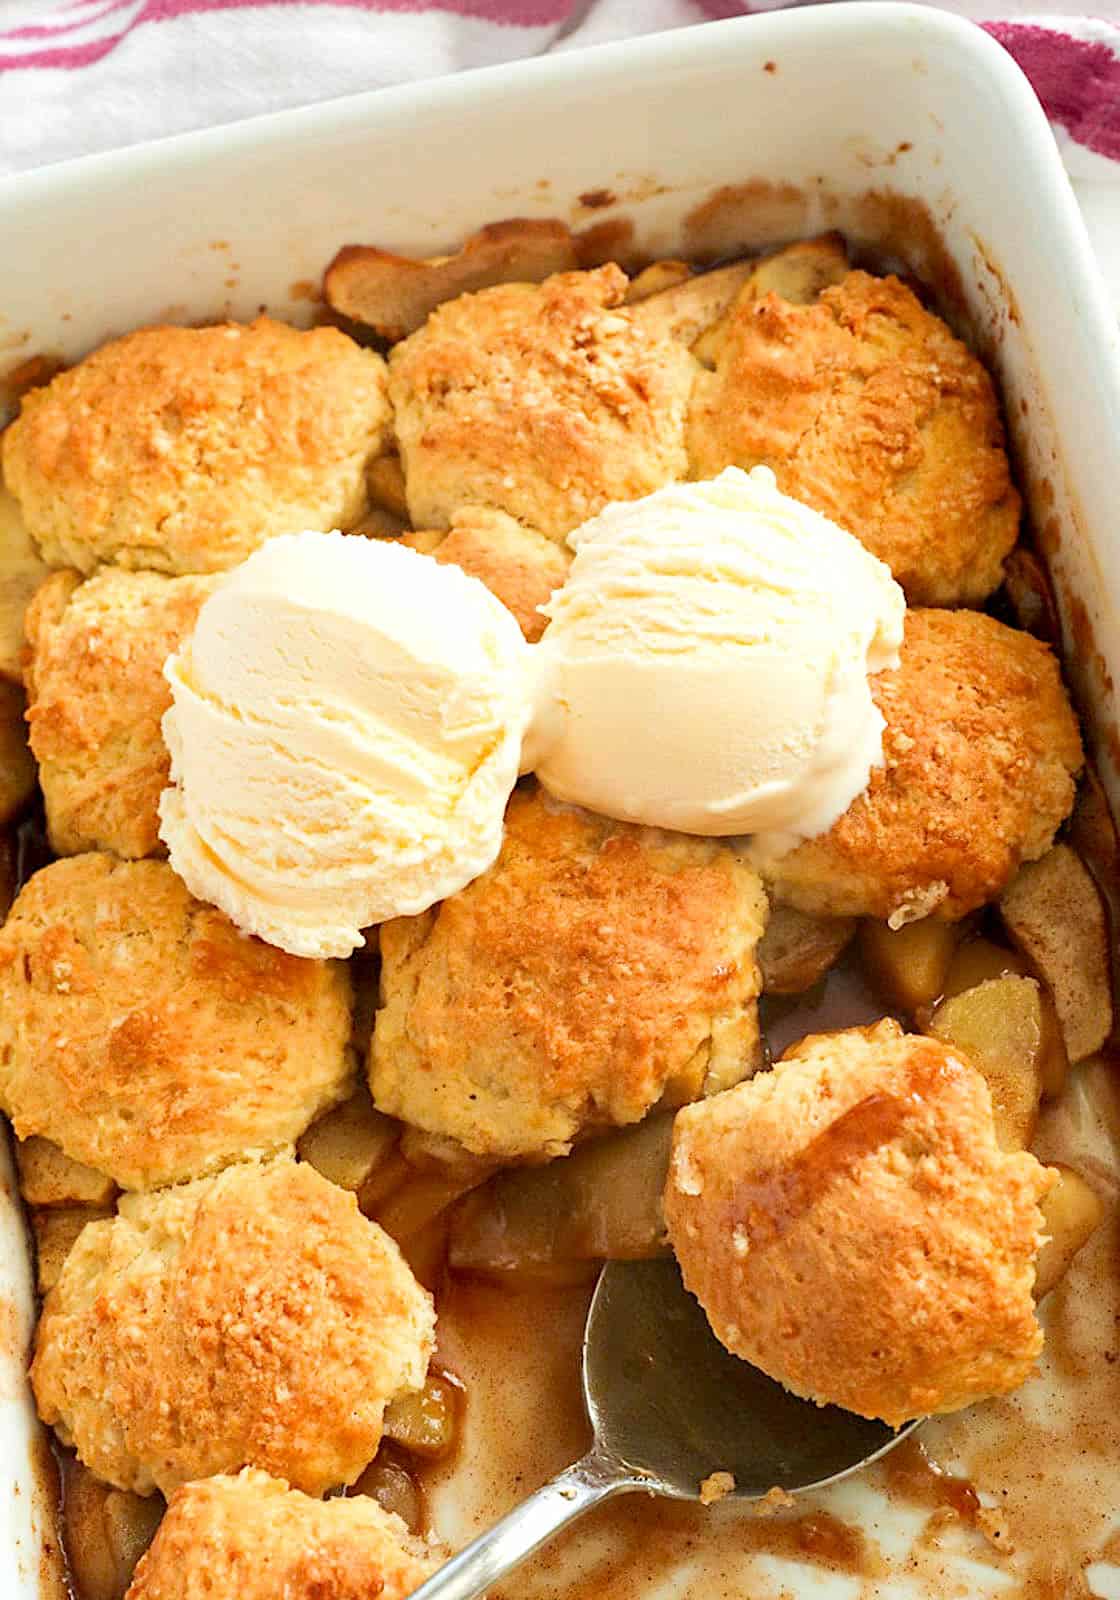 Serving comforing apple cobbler with ice cream